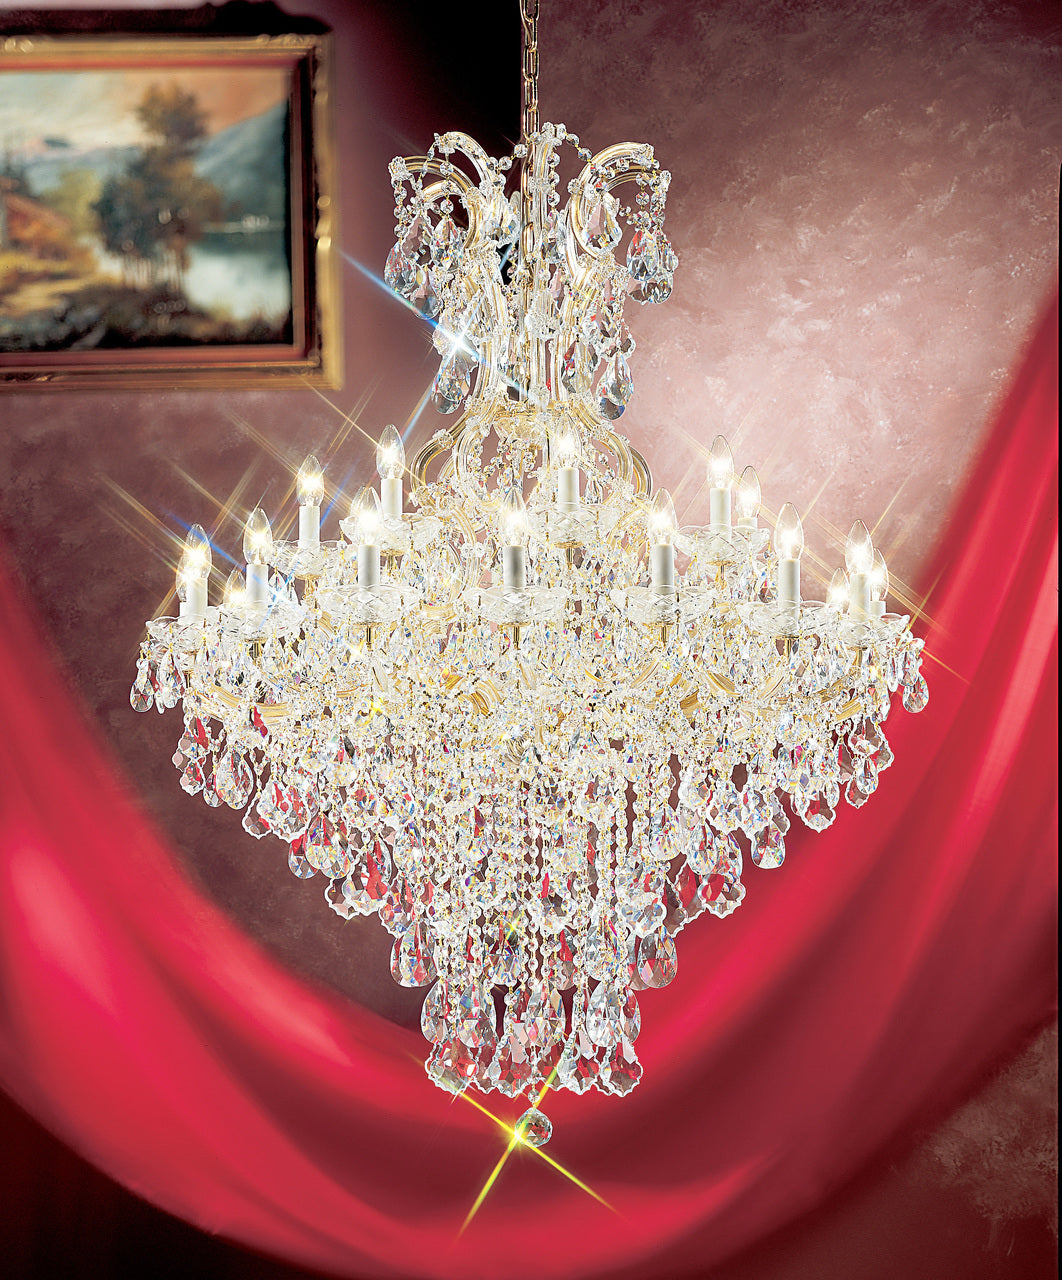 Classic Lighting 8179 OWG SC Maria Theresa Traditional Crystal Chandelier in Olde World Gold (Imported from Italy)